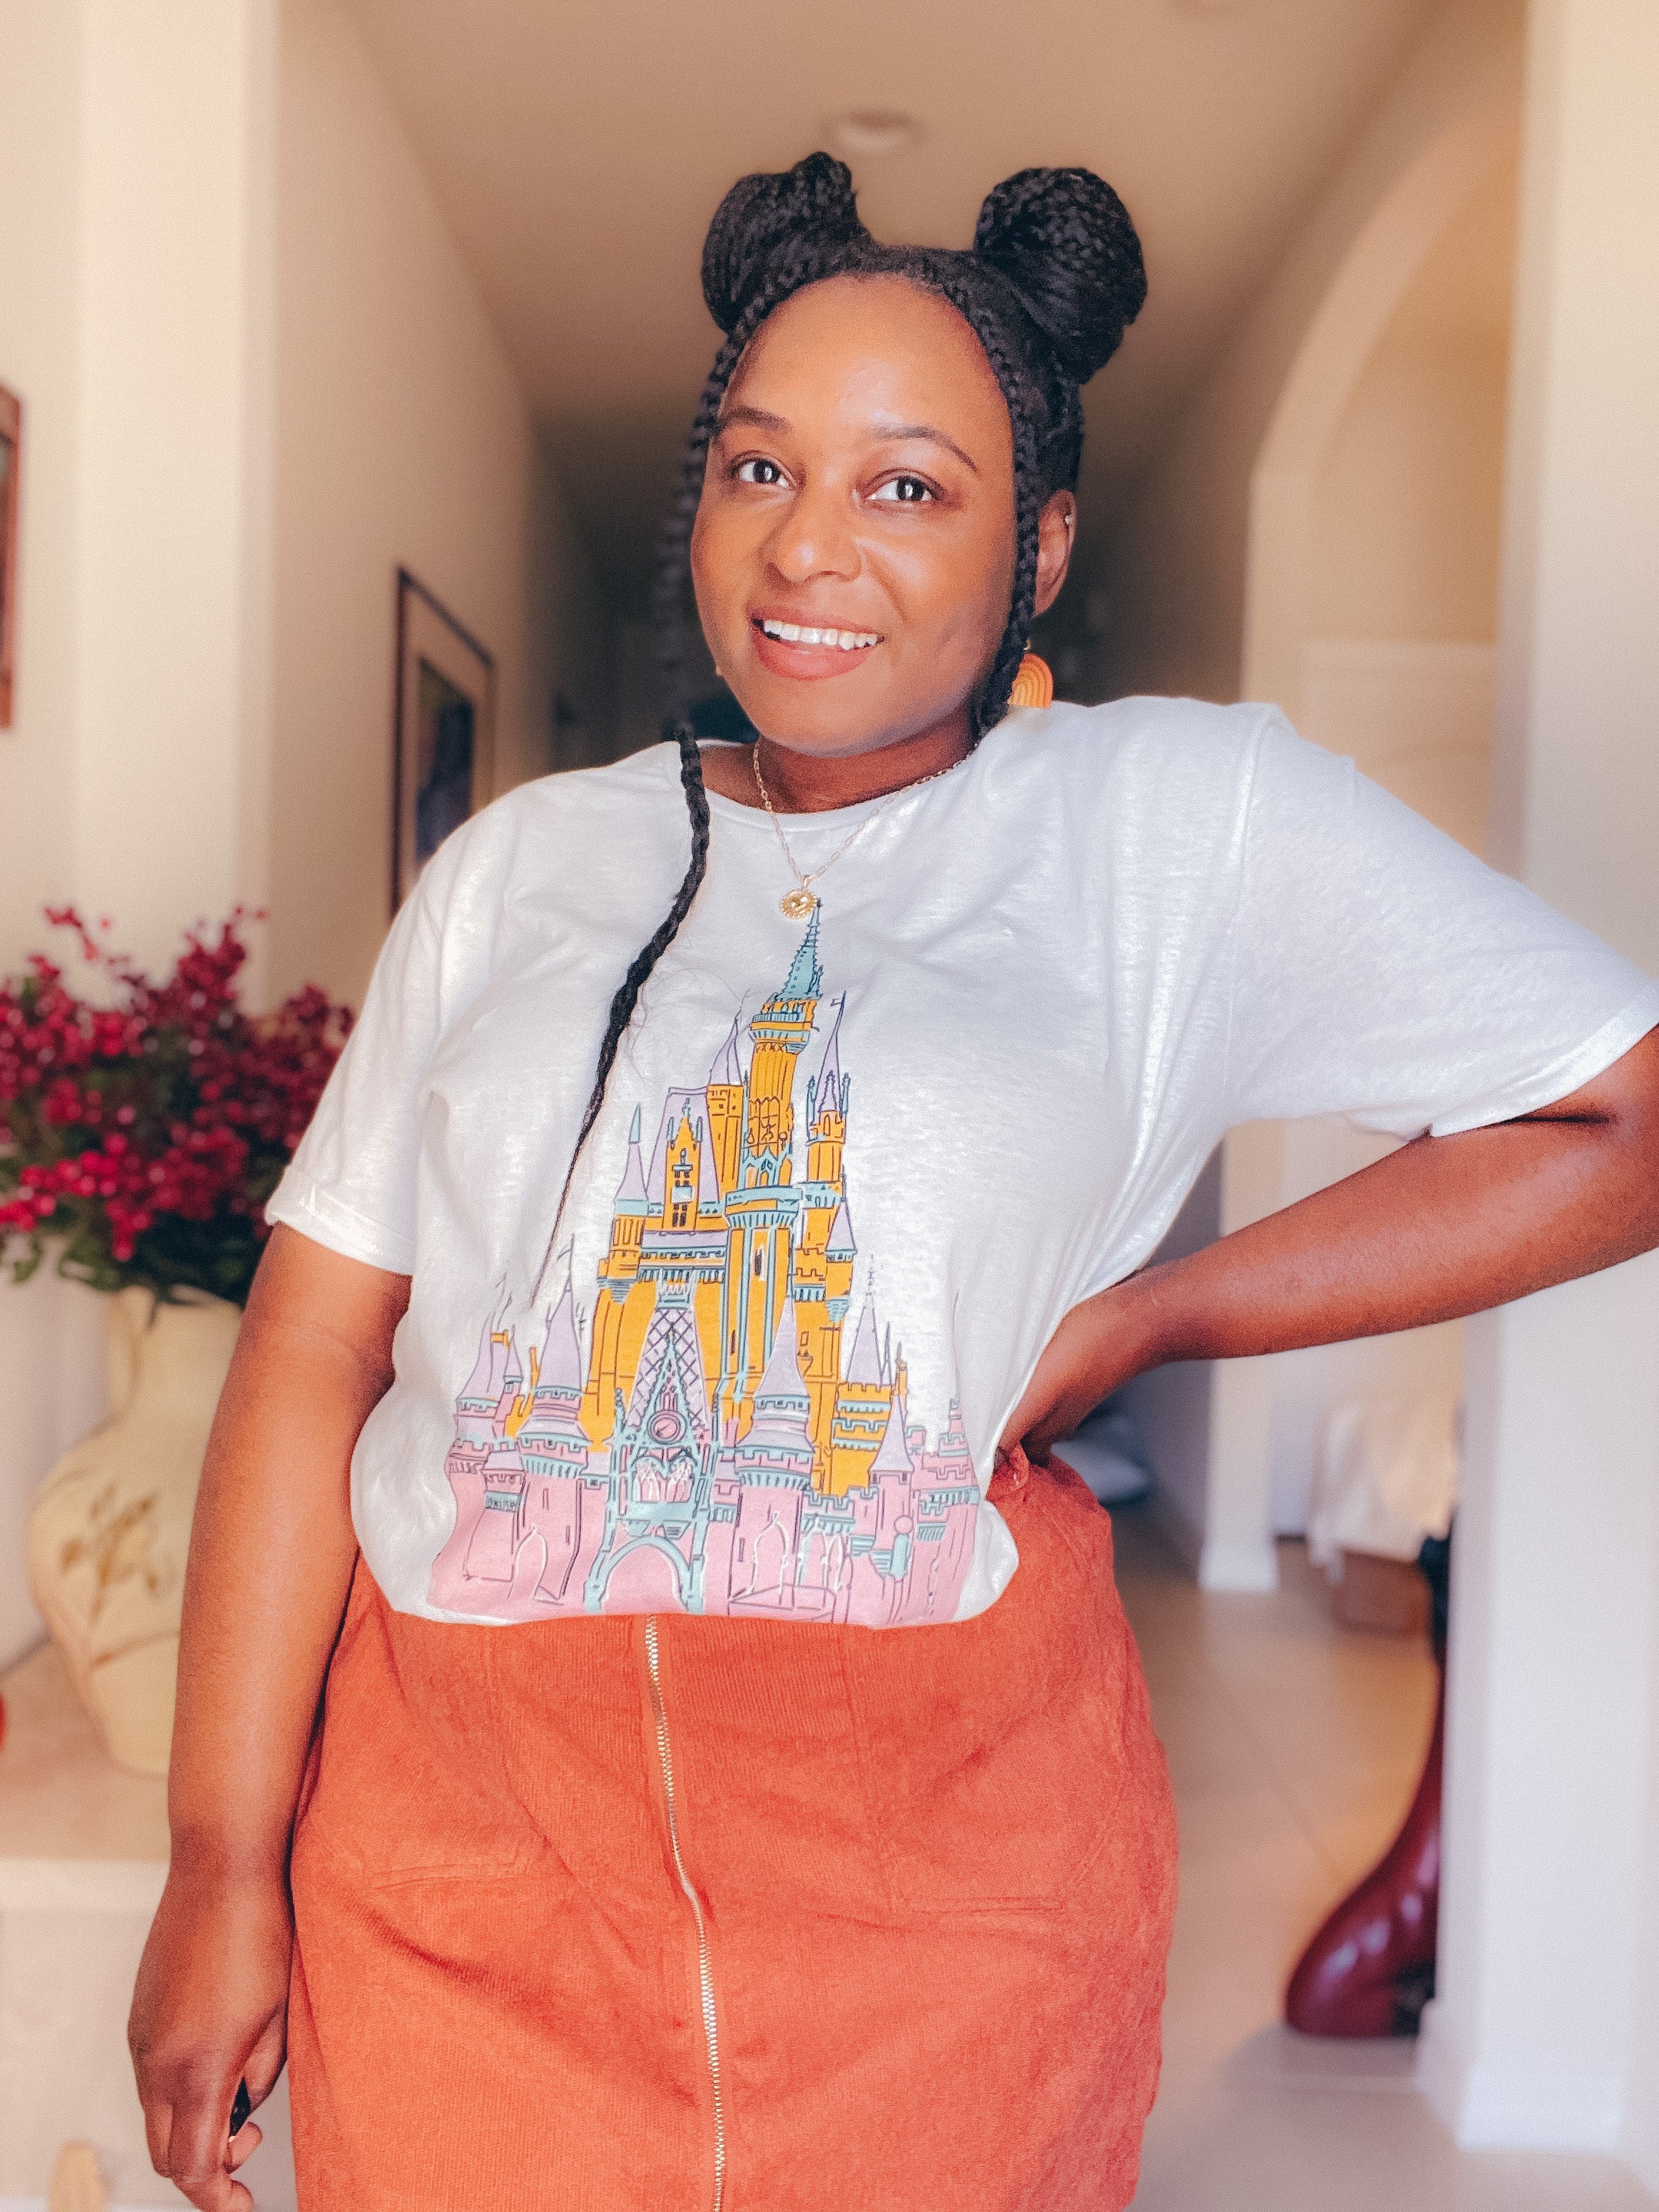 3 ways to Style our Magic Kingdom Disney Inspired T-shirt | Styleguide